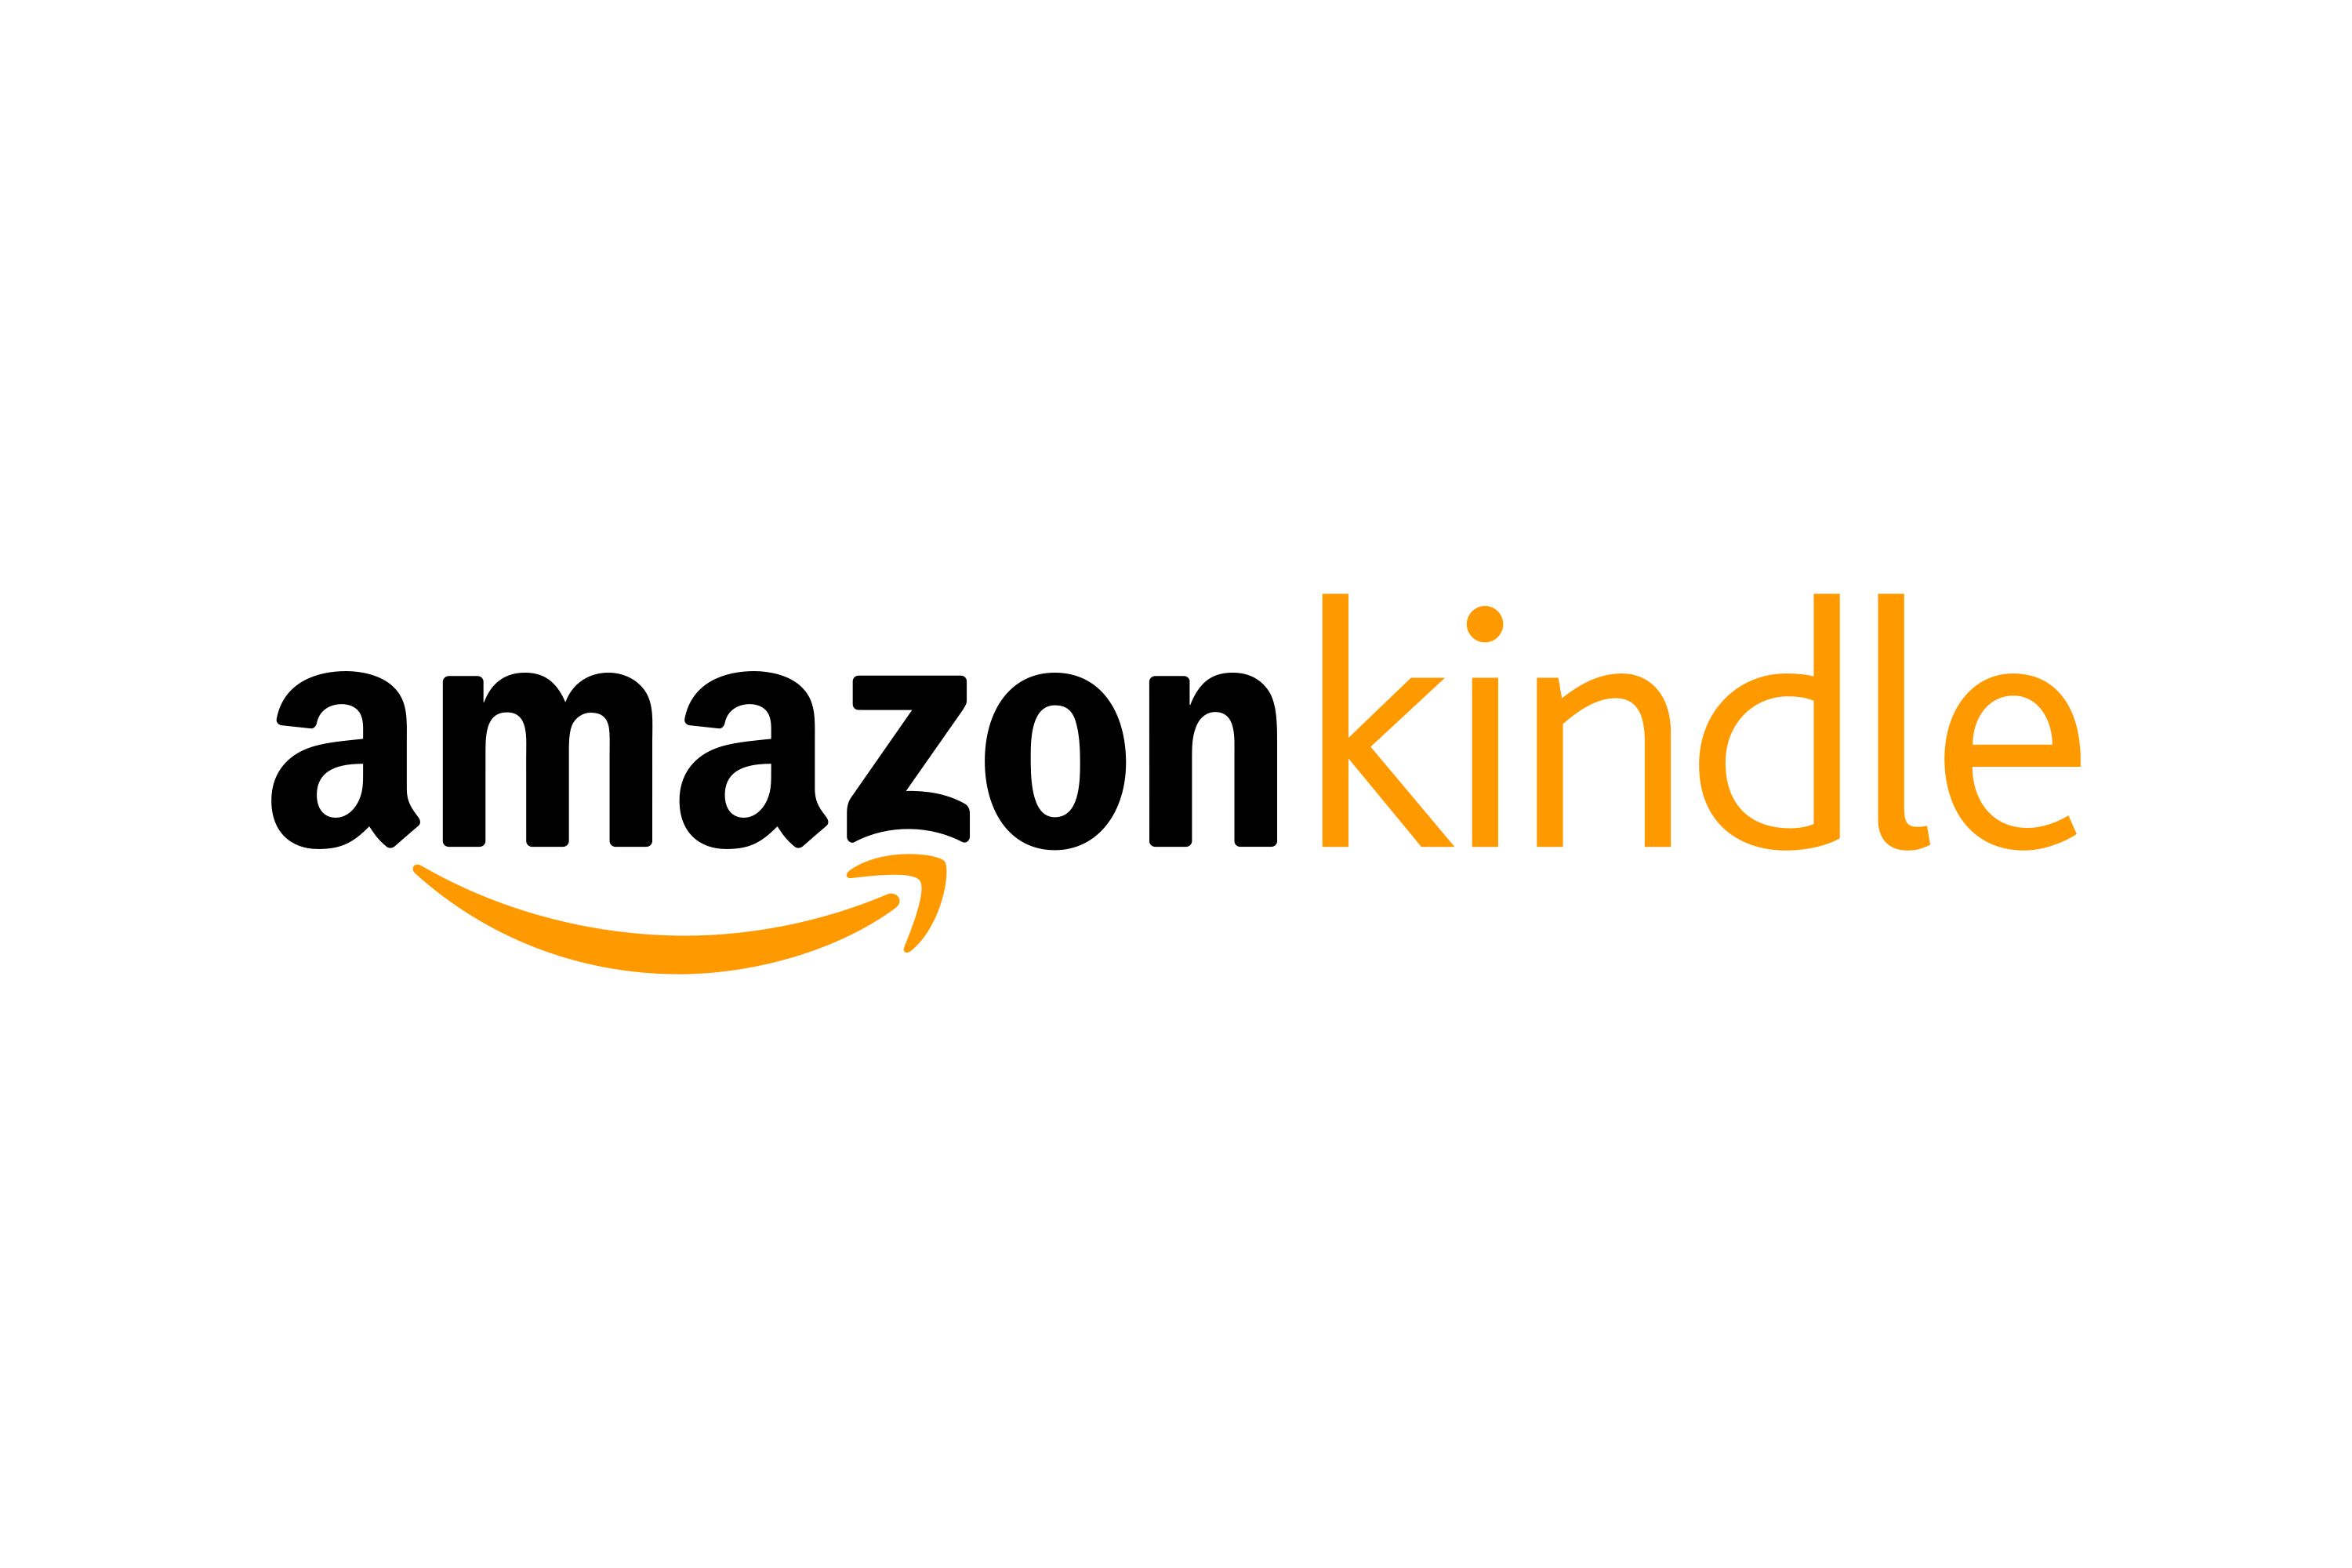 Download Amazon Kindle Logo In Svg Vector Or Png File Format Logo Wine